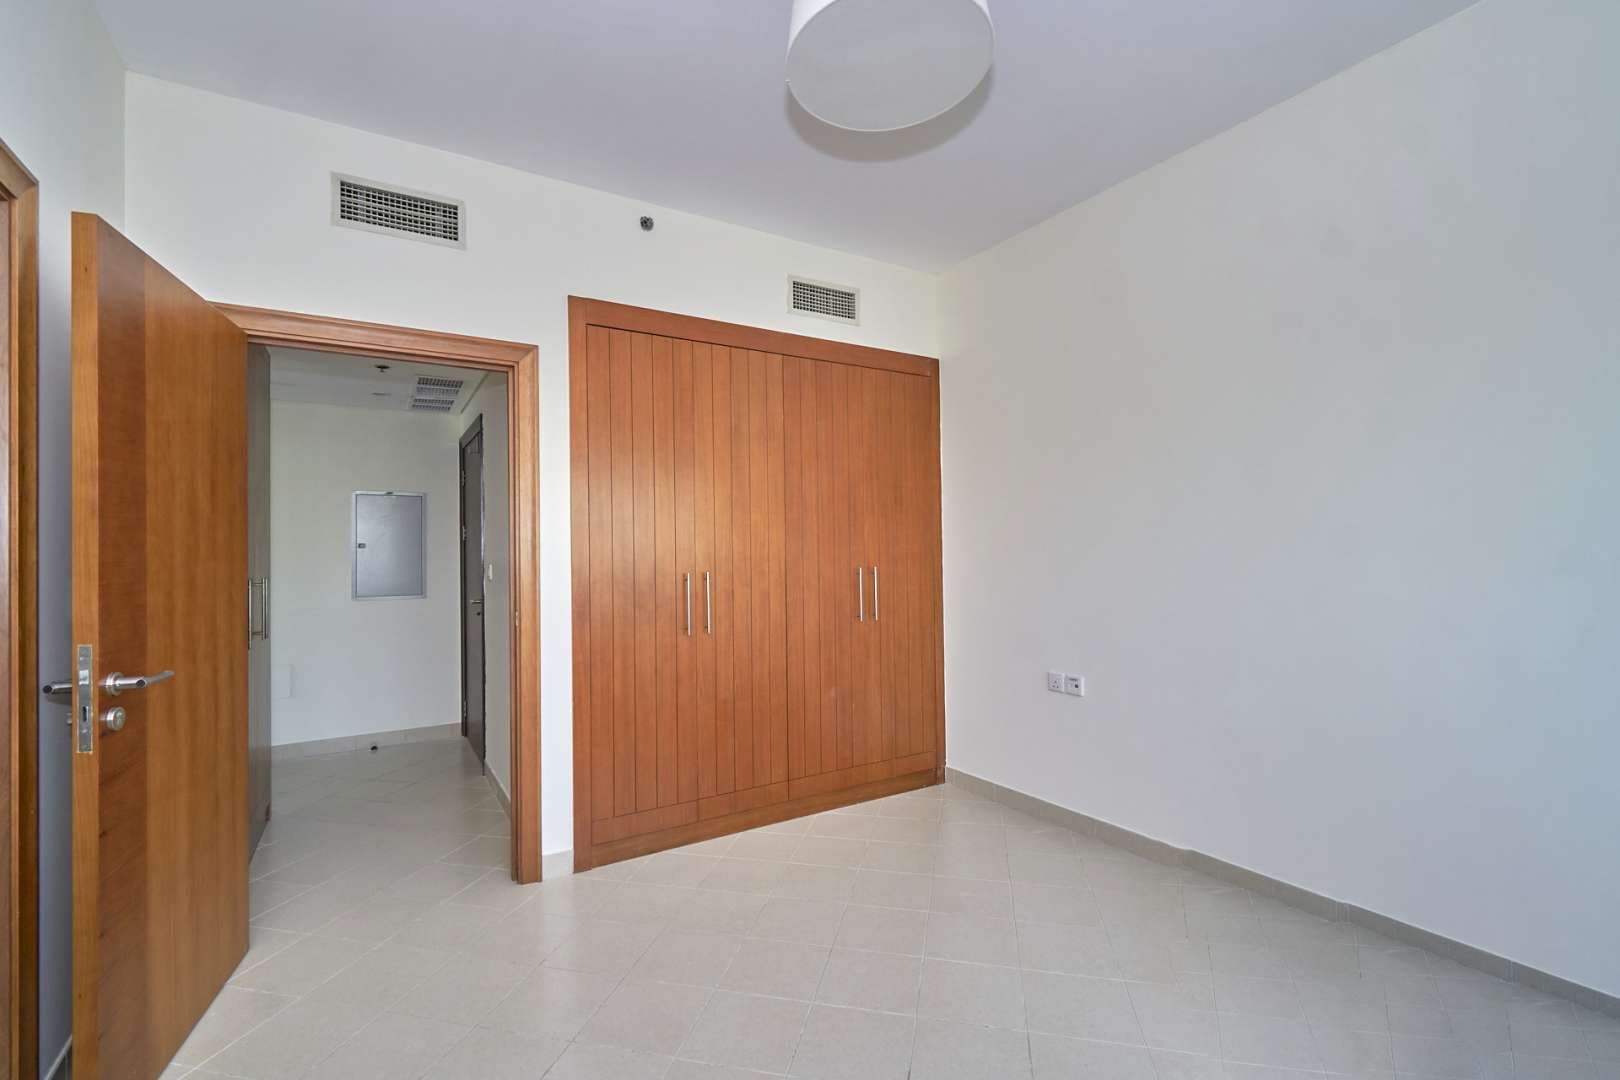 1 Bedroom Apartment For Rent Golf Towers Lp09053 15b27abacdf97700.jpg